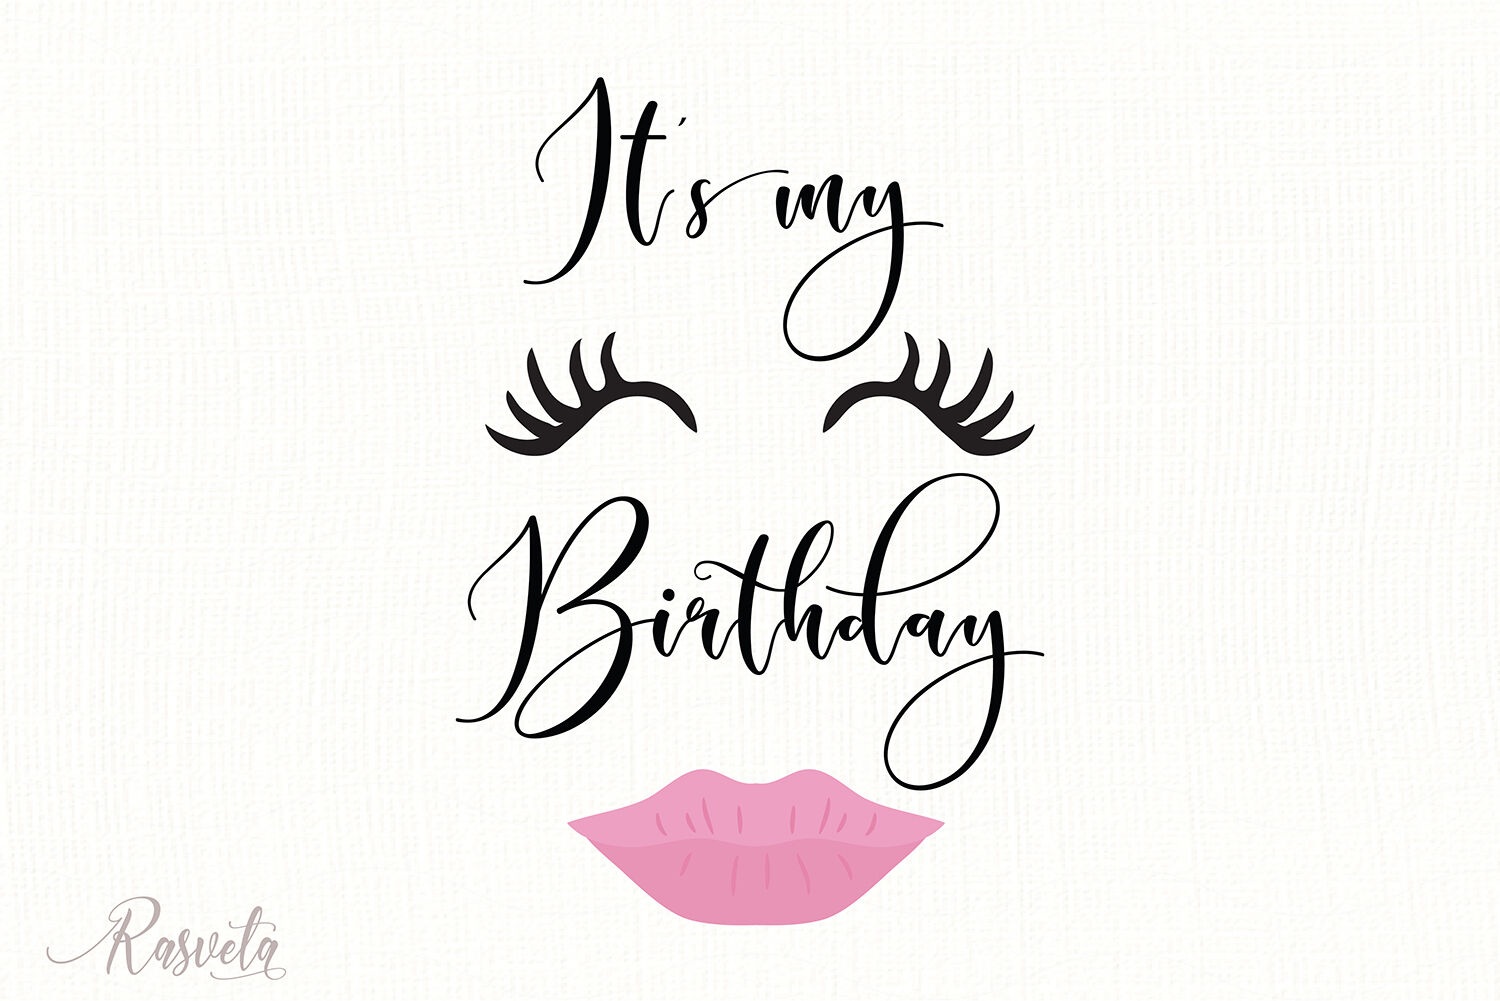 It's Its my birthday day Quote Print Digital Female Face Makeup ...